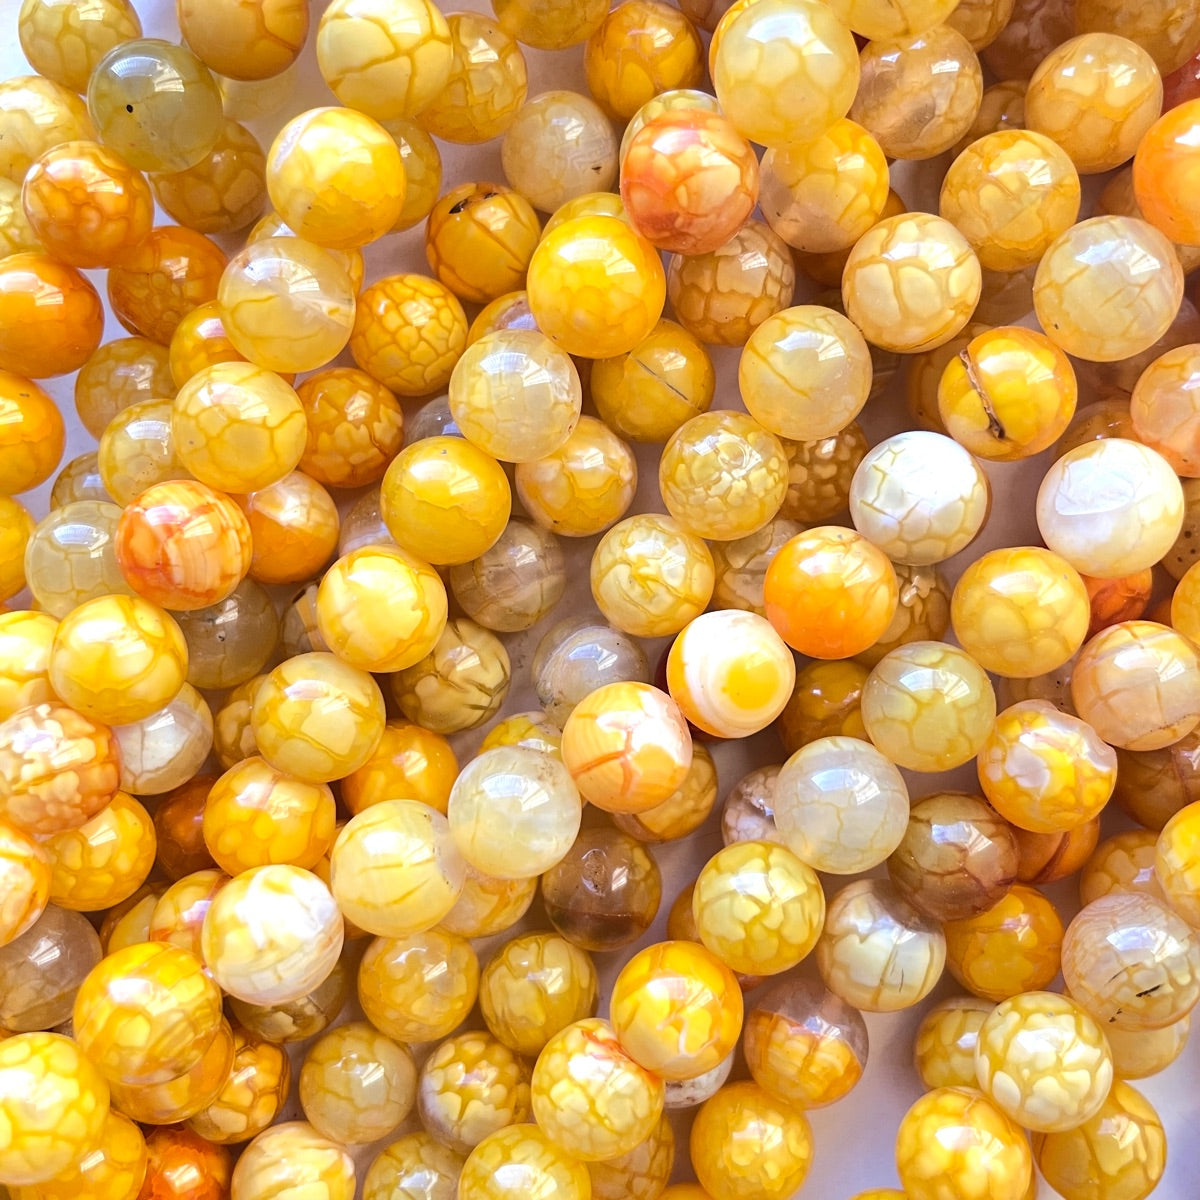 2 Strands/lot 10mm Colorful Cracked Fire Agate Round Stone Beads Yellow Stone Beads New Beads Arrivals Round Agate Beads Charms Beads Beyond